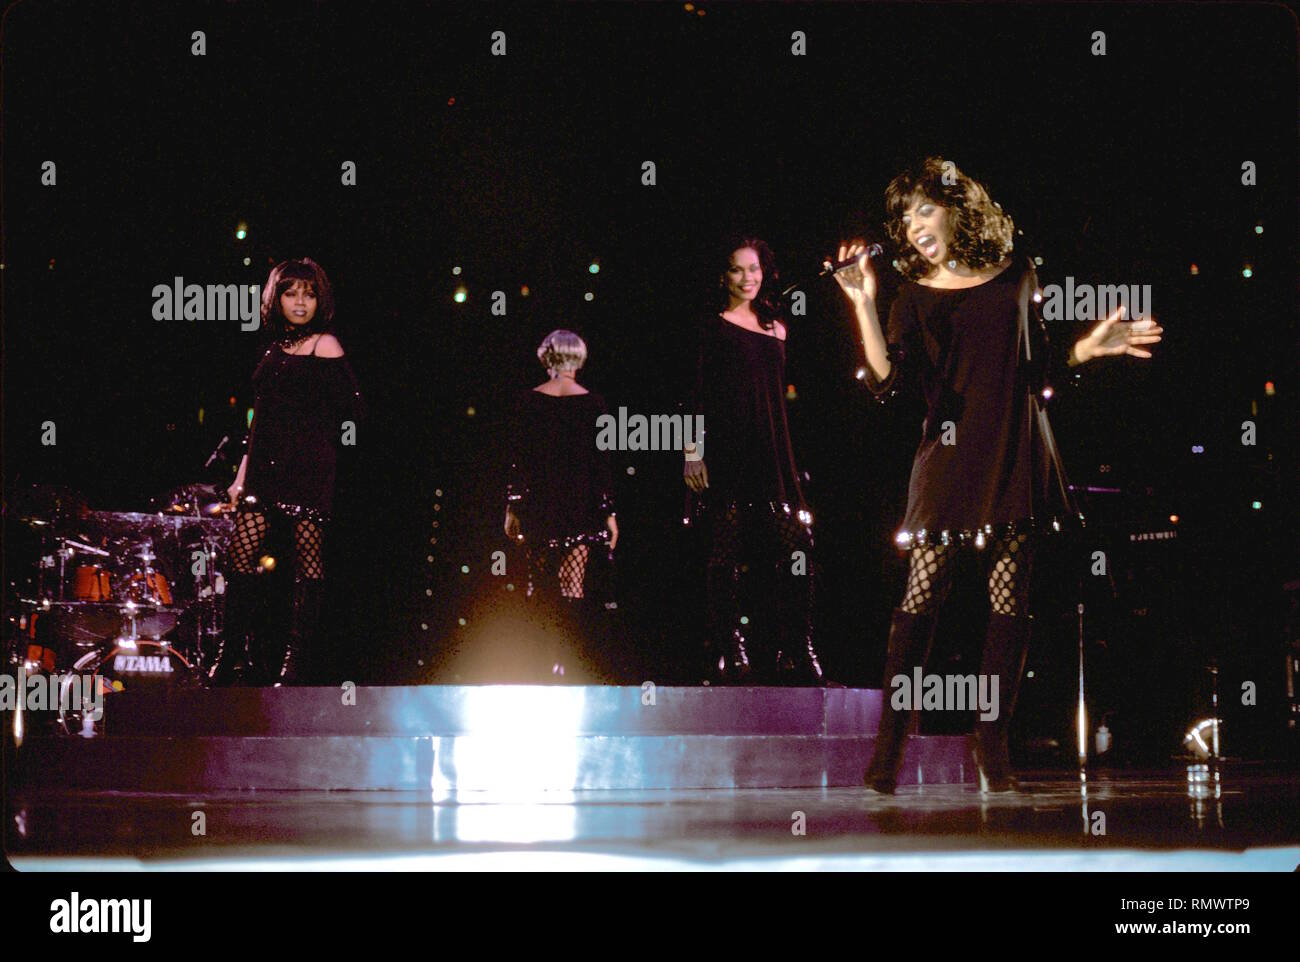 Grammy nominated female R&B vocal quartet is shown onstage during a 'live' concert appearance. Stock Photo